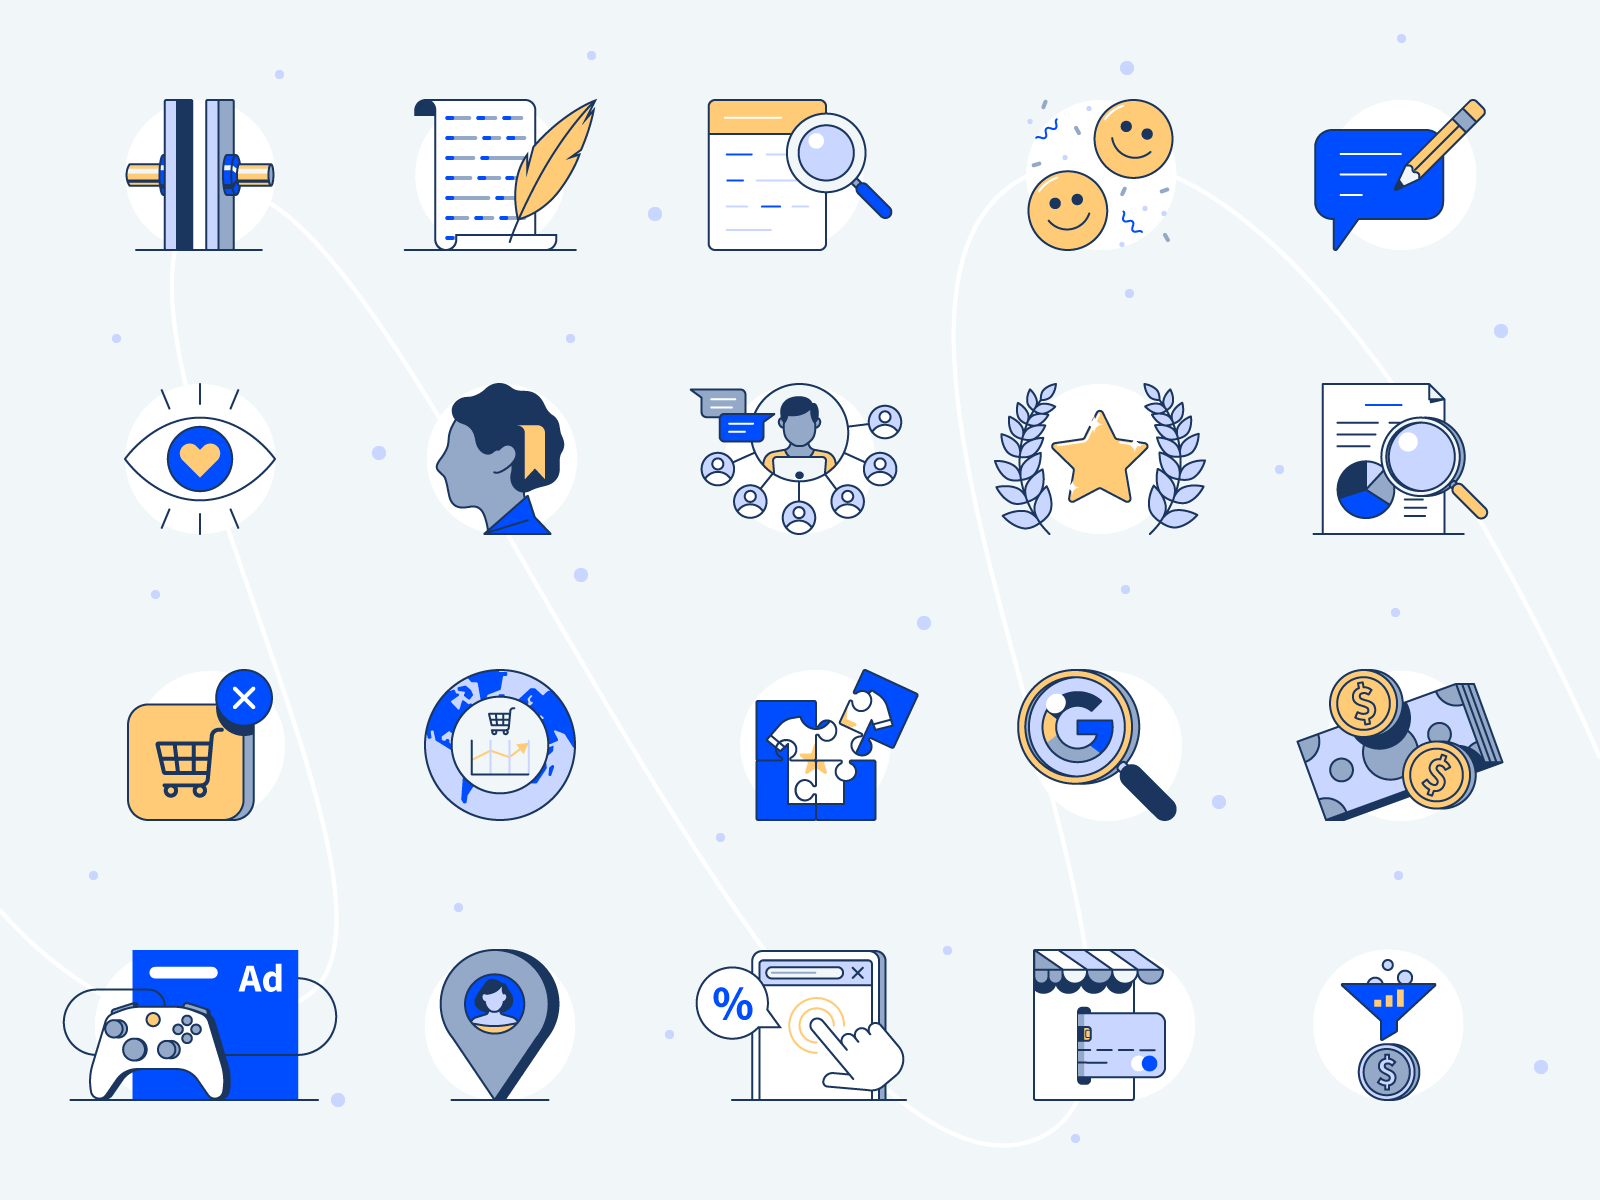 Blog post illustrations #7 character design flat icons illustration infographic vector